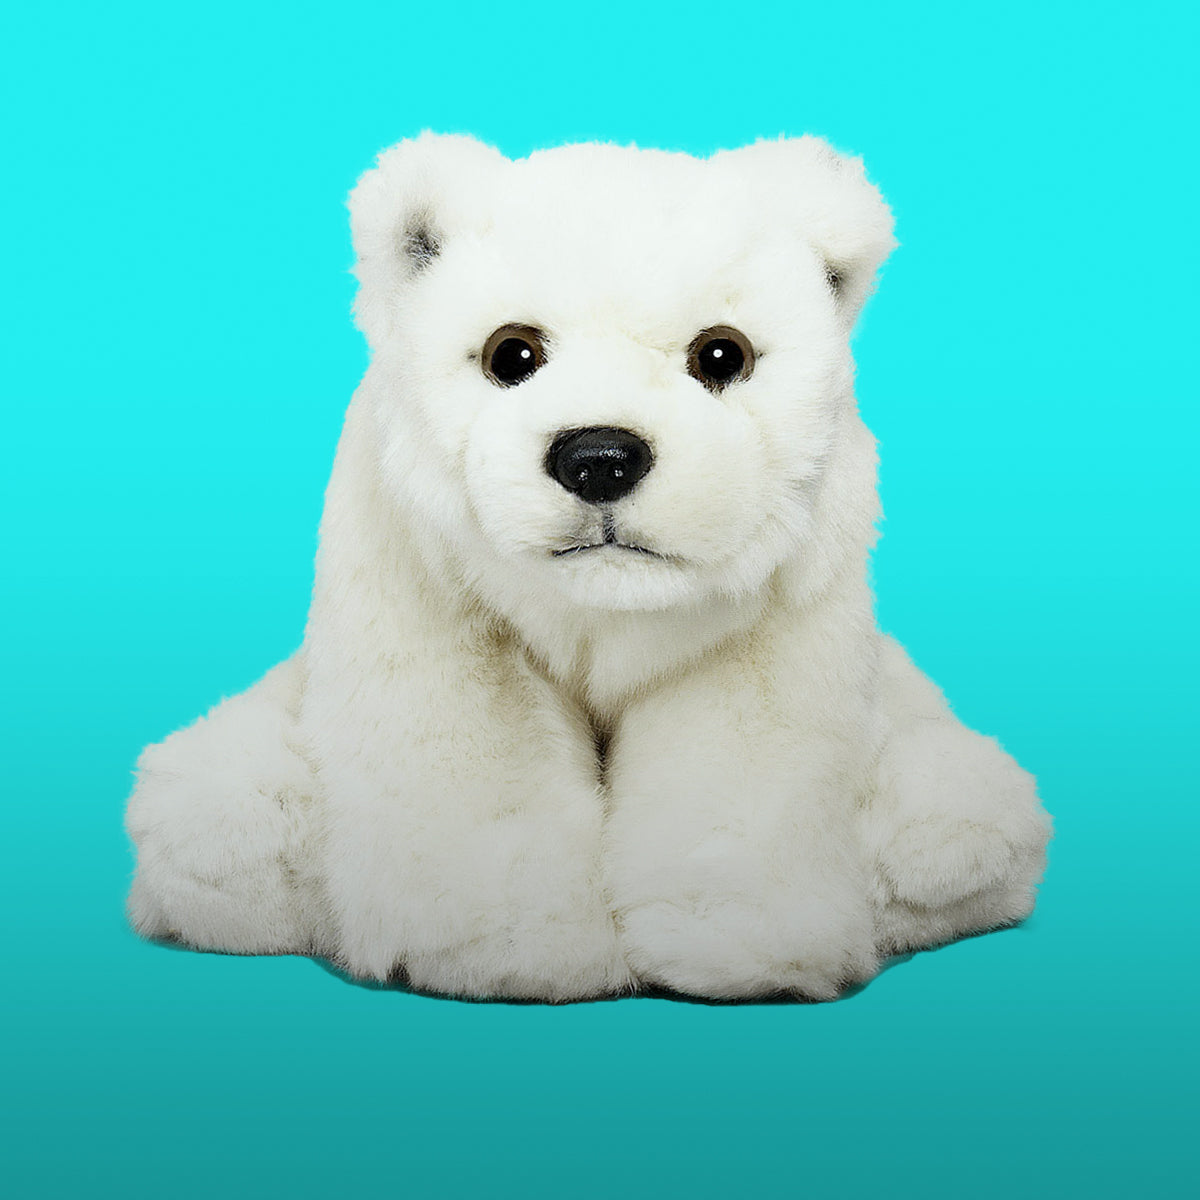 PELUCHE OURS POLAIRE BLANC : CE Eveil Bouchara